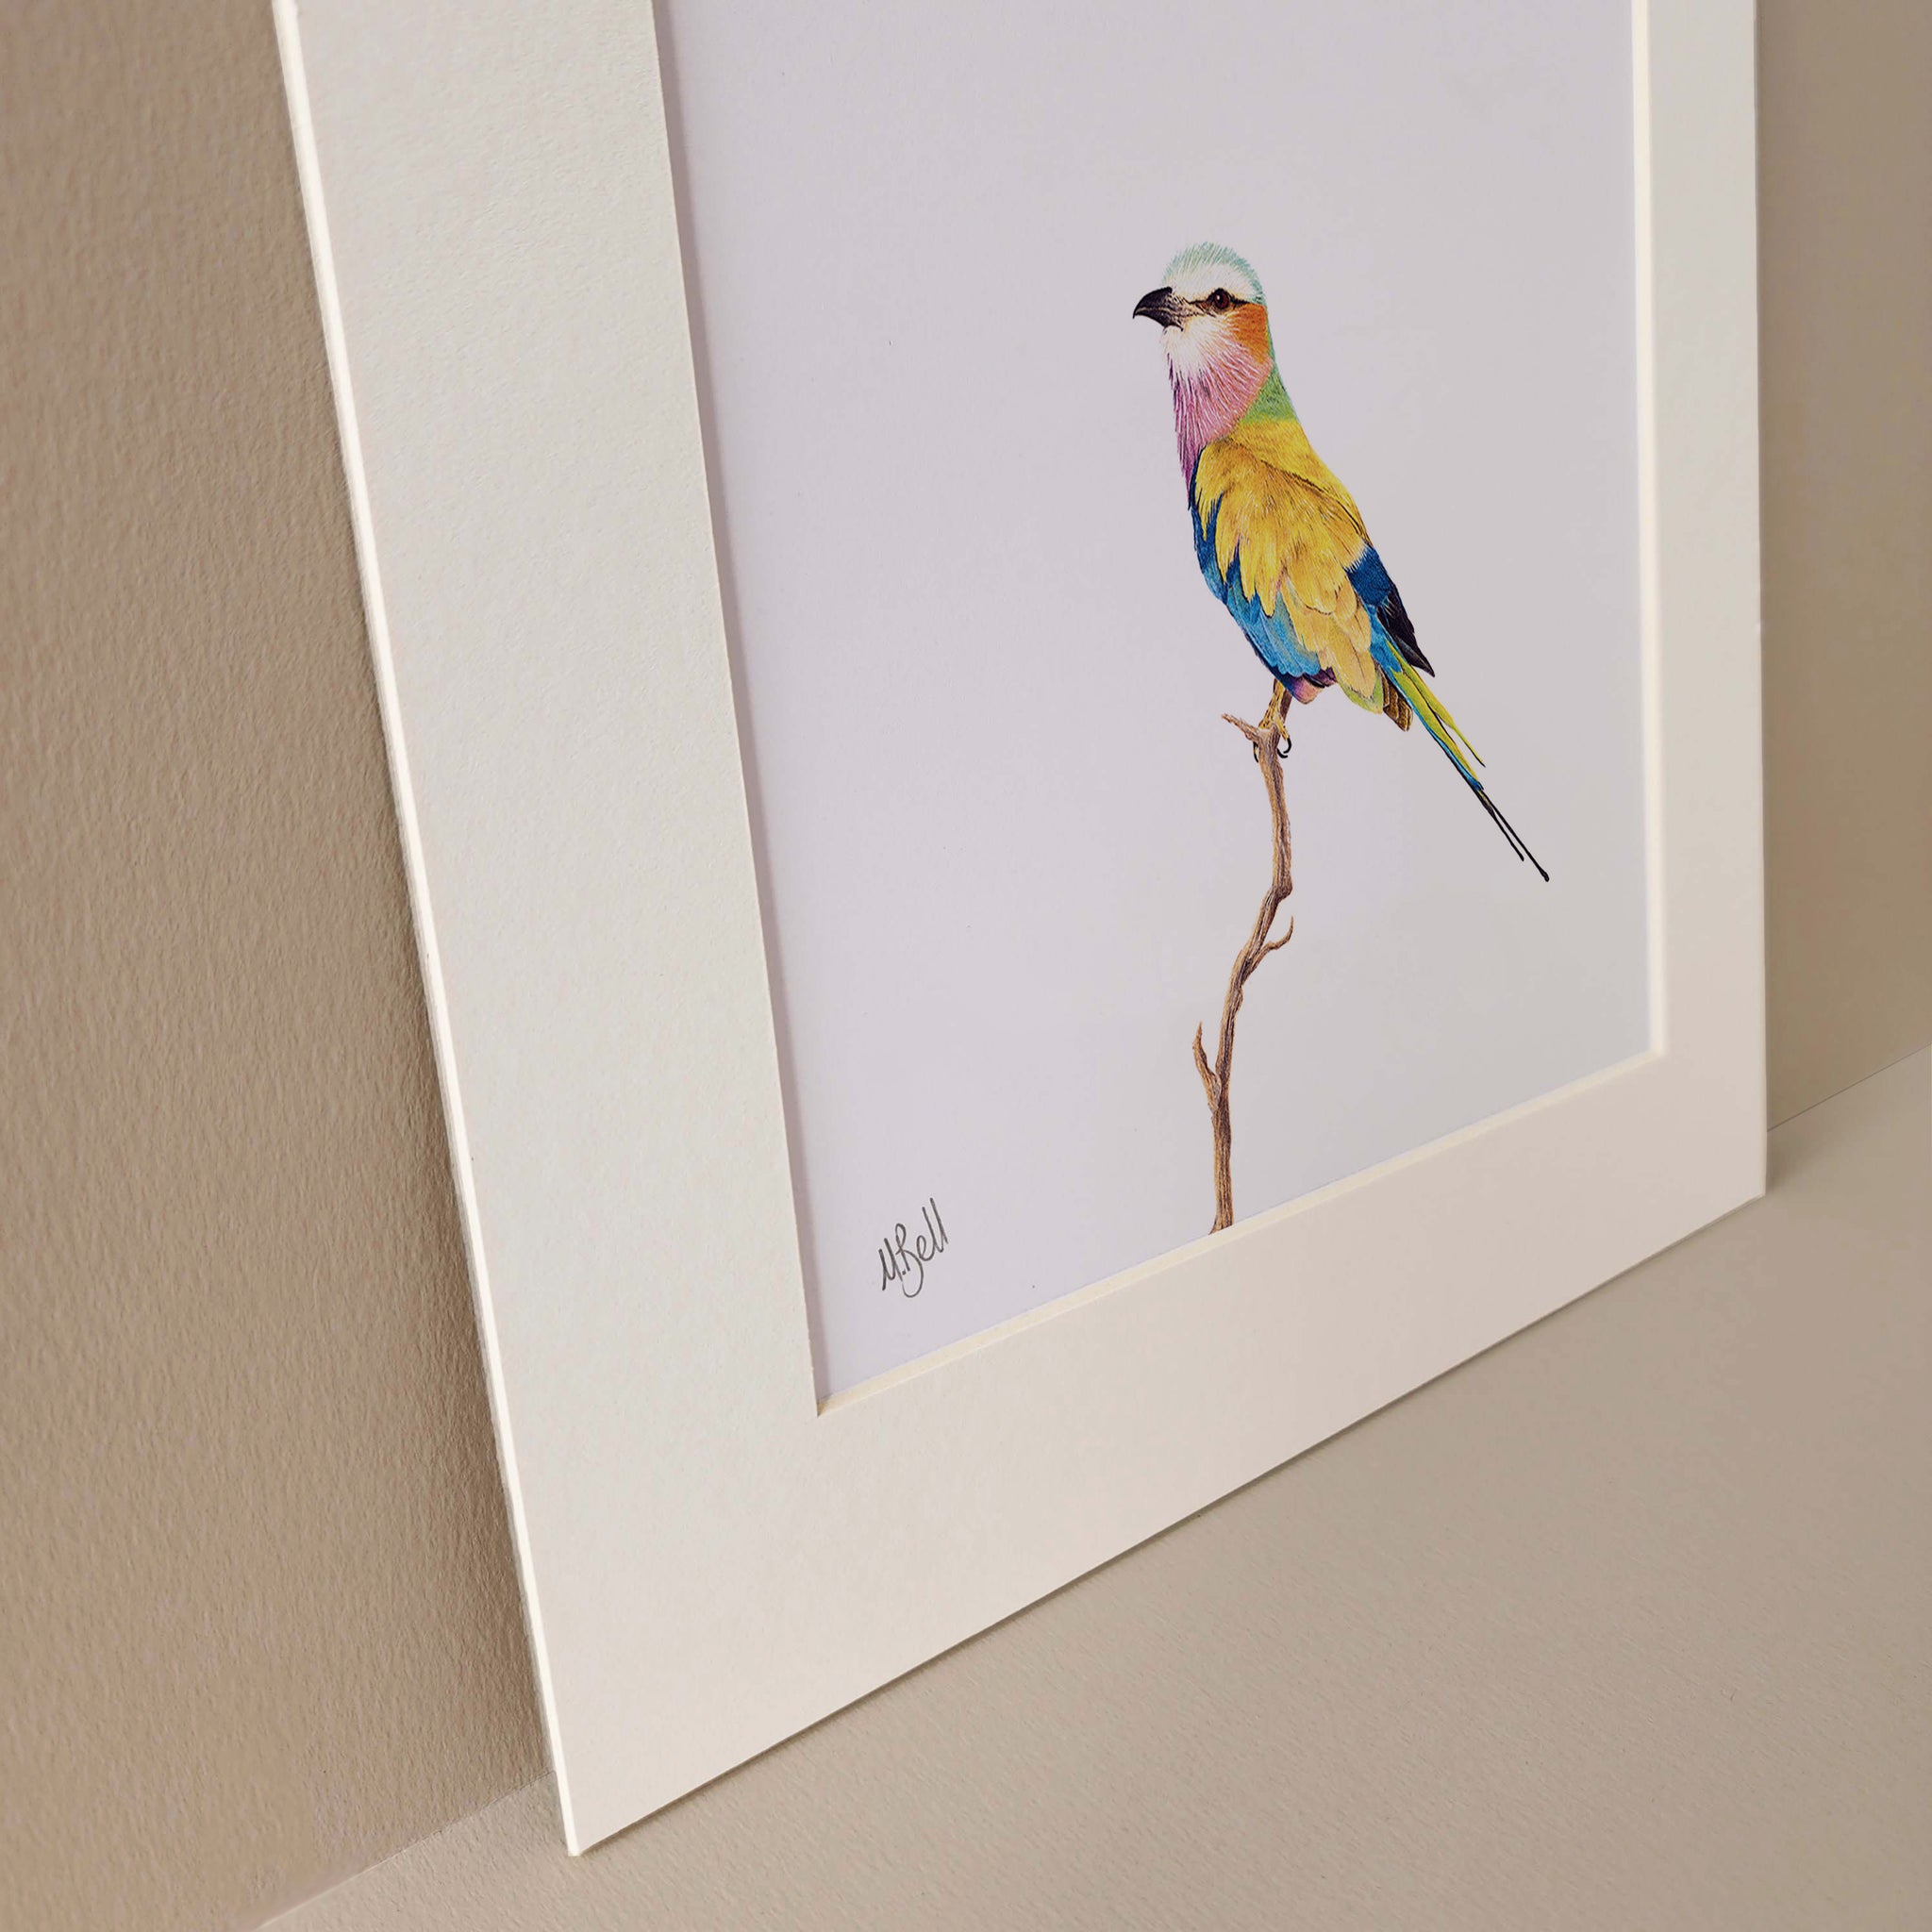 Lilac Breasted Roller drawing by Matthew Bell